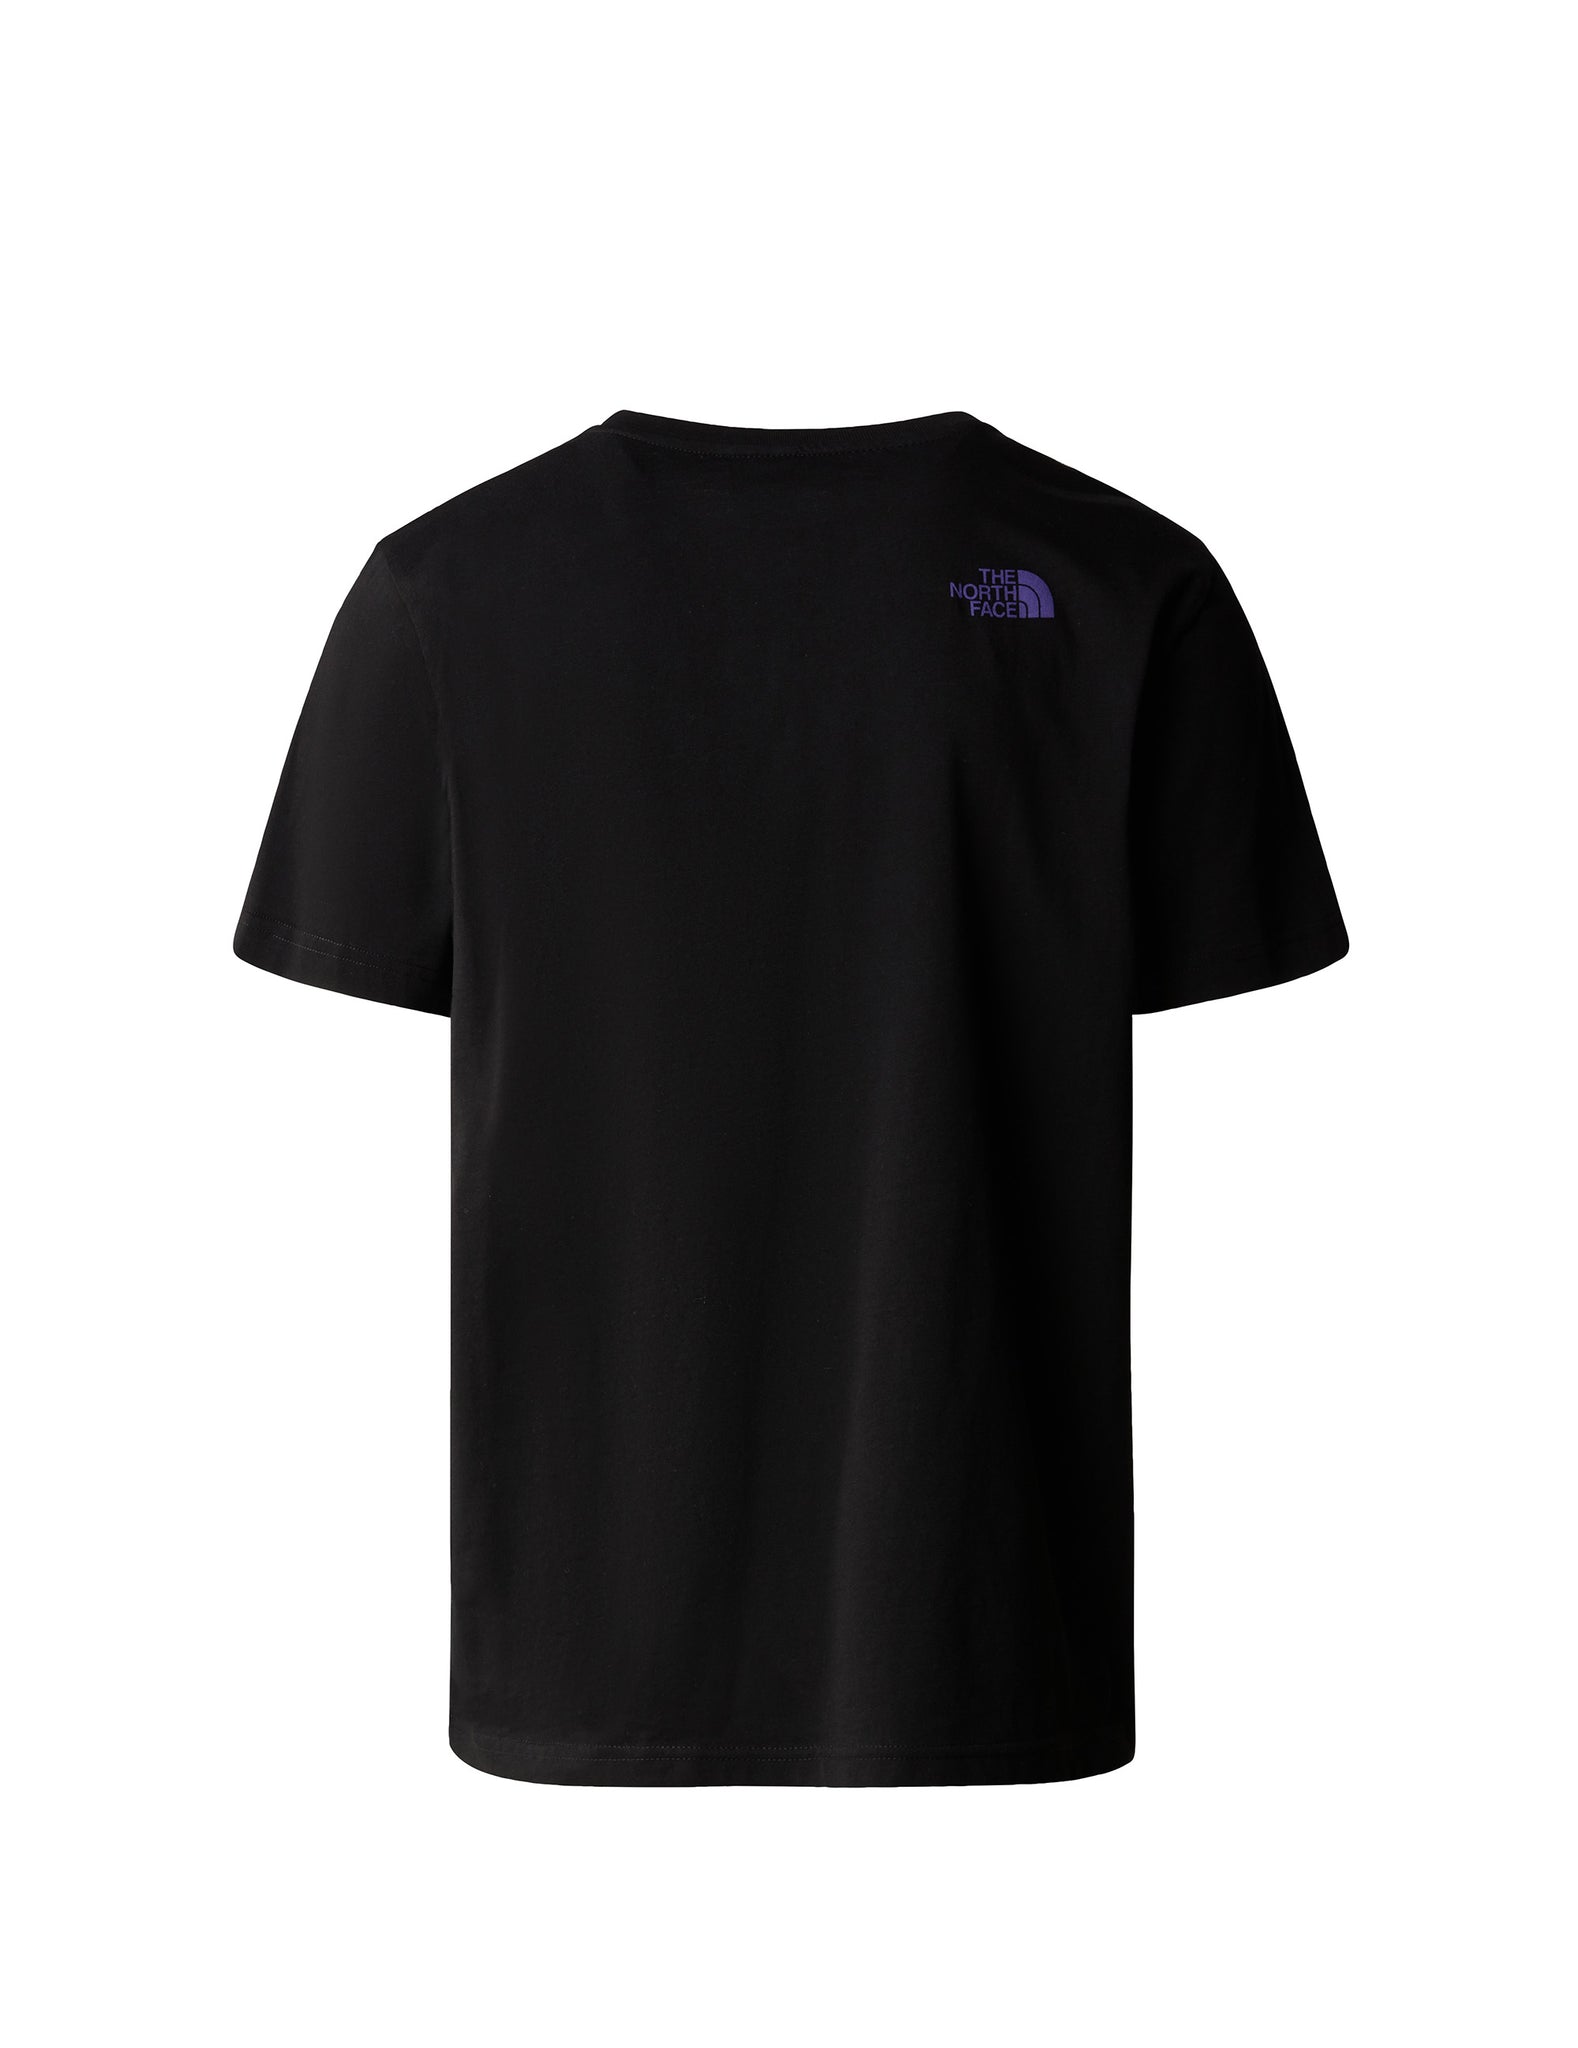 The North Face Men'S S/S Rust 2 Tee Black